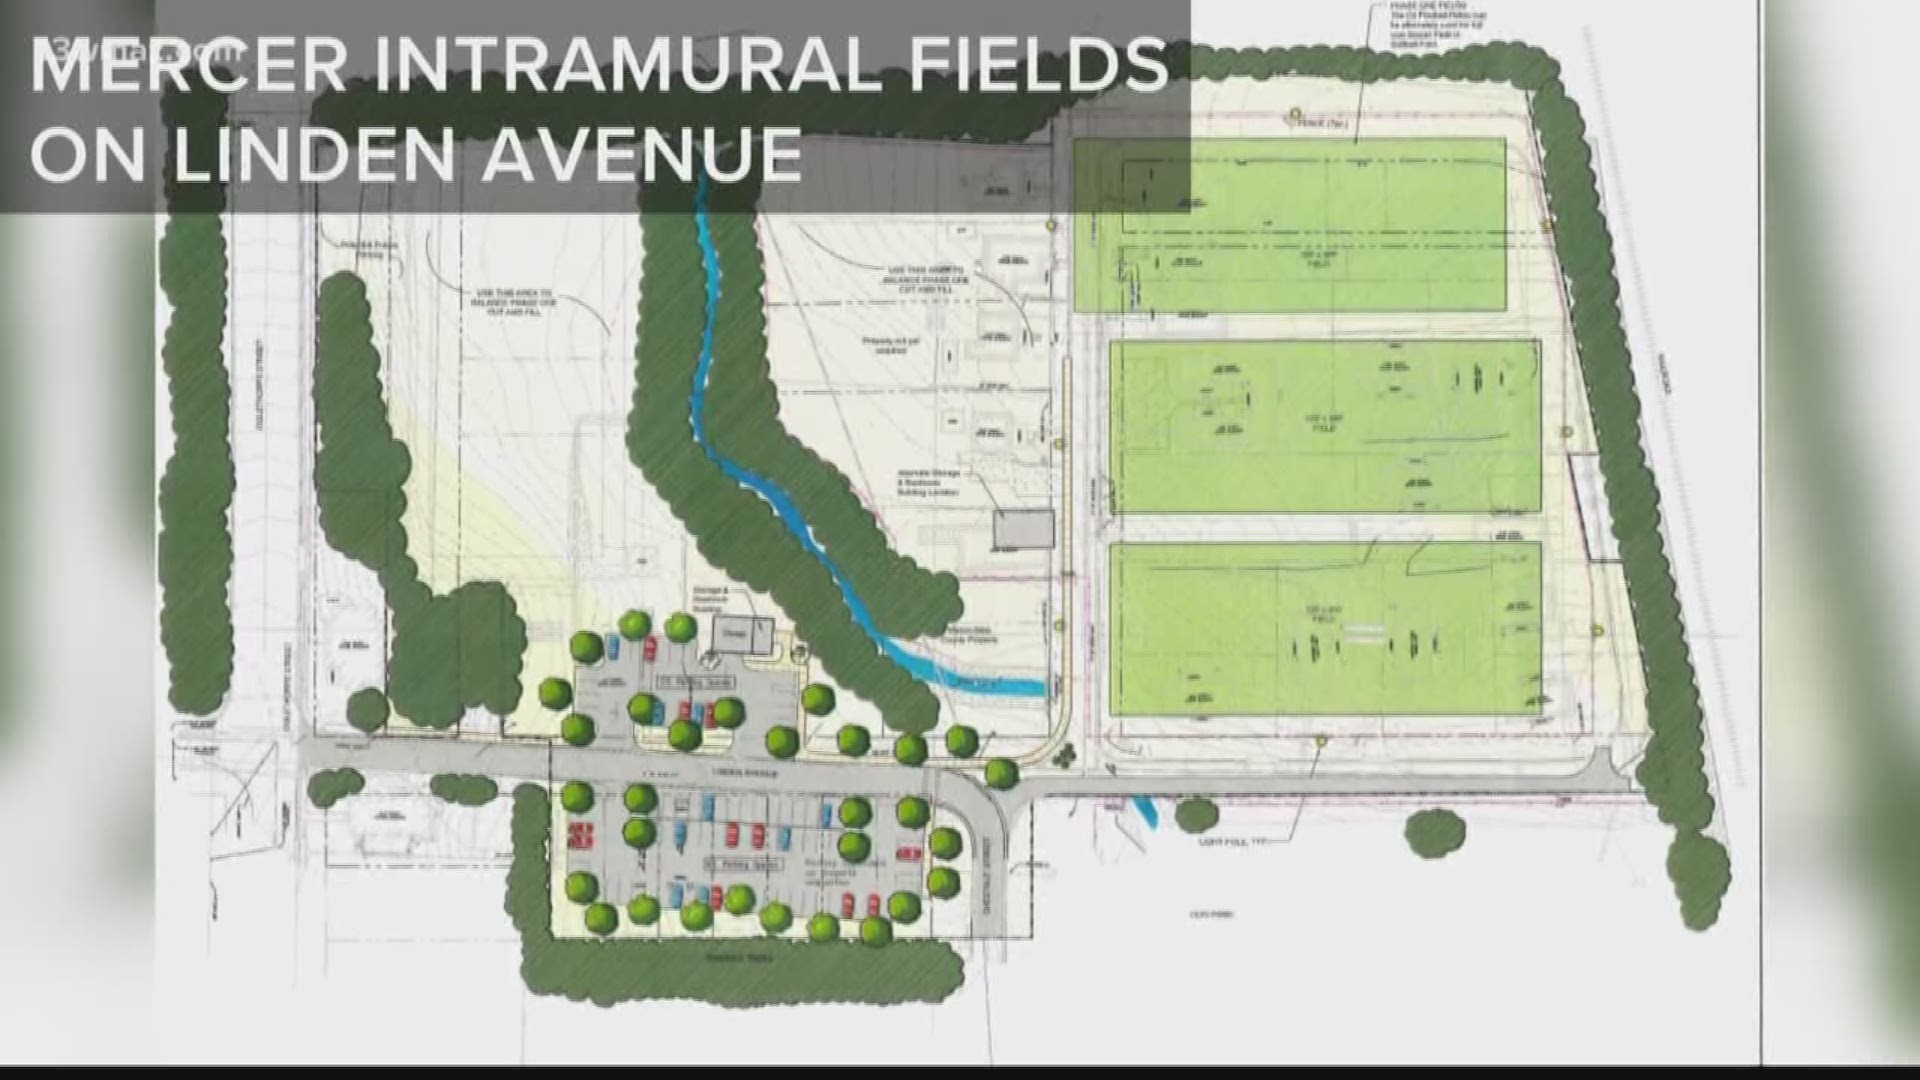 A cemetery on Eisenhower Parkway and three Mercer University intramural fields on Linden Avenue were approved by Macon-Bibb Planning and Zoning at their Monday meeting.